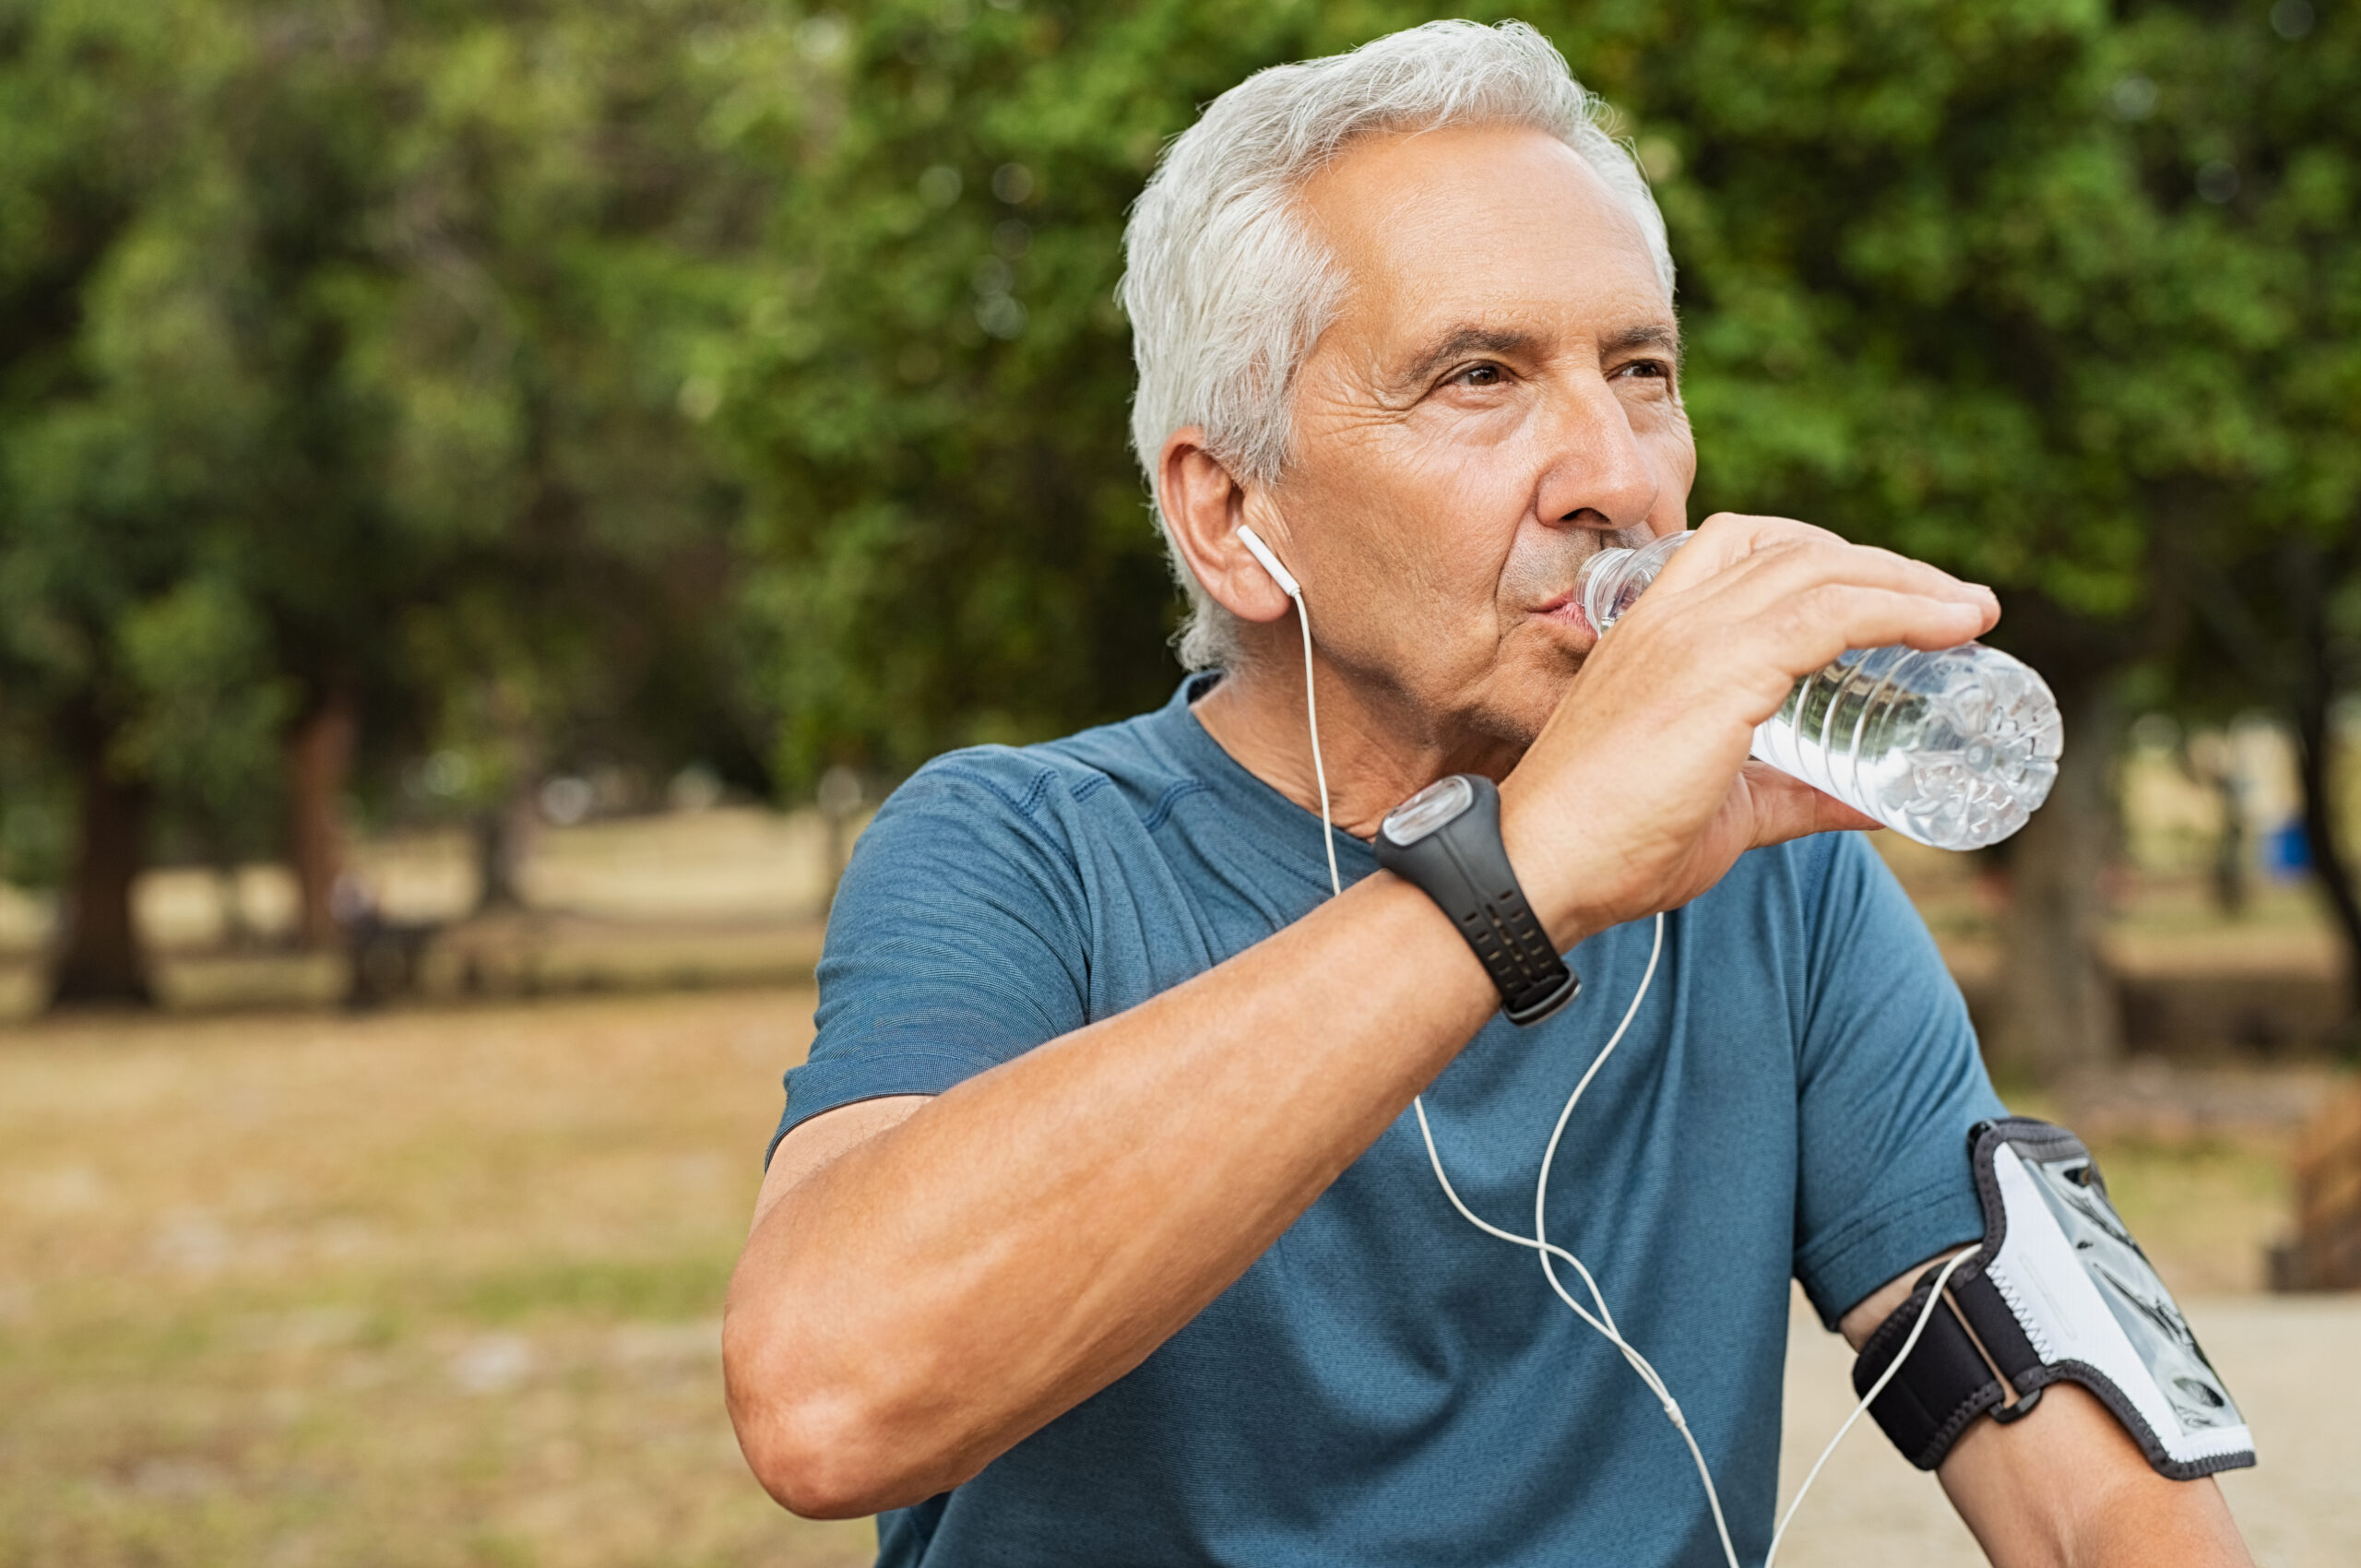 Fit Thirsty Senior Man Drinking Water Before Running. Active Old